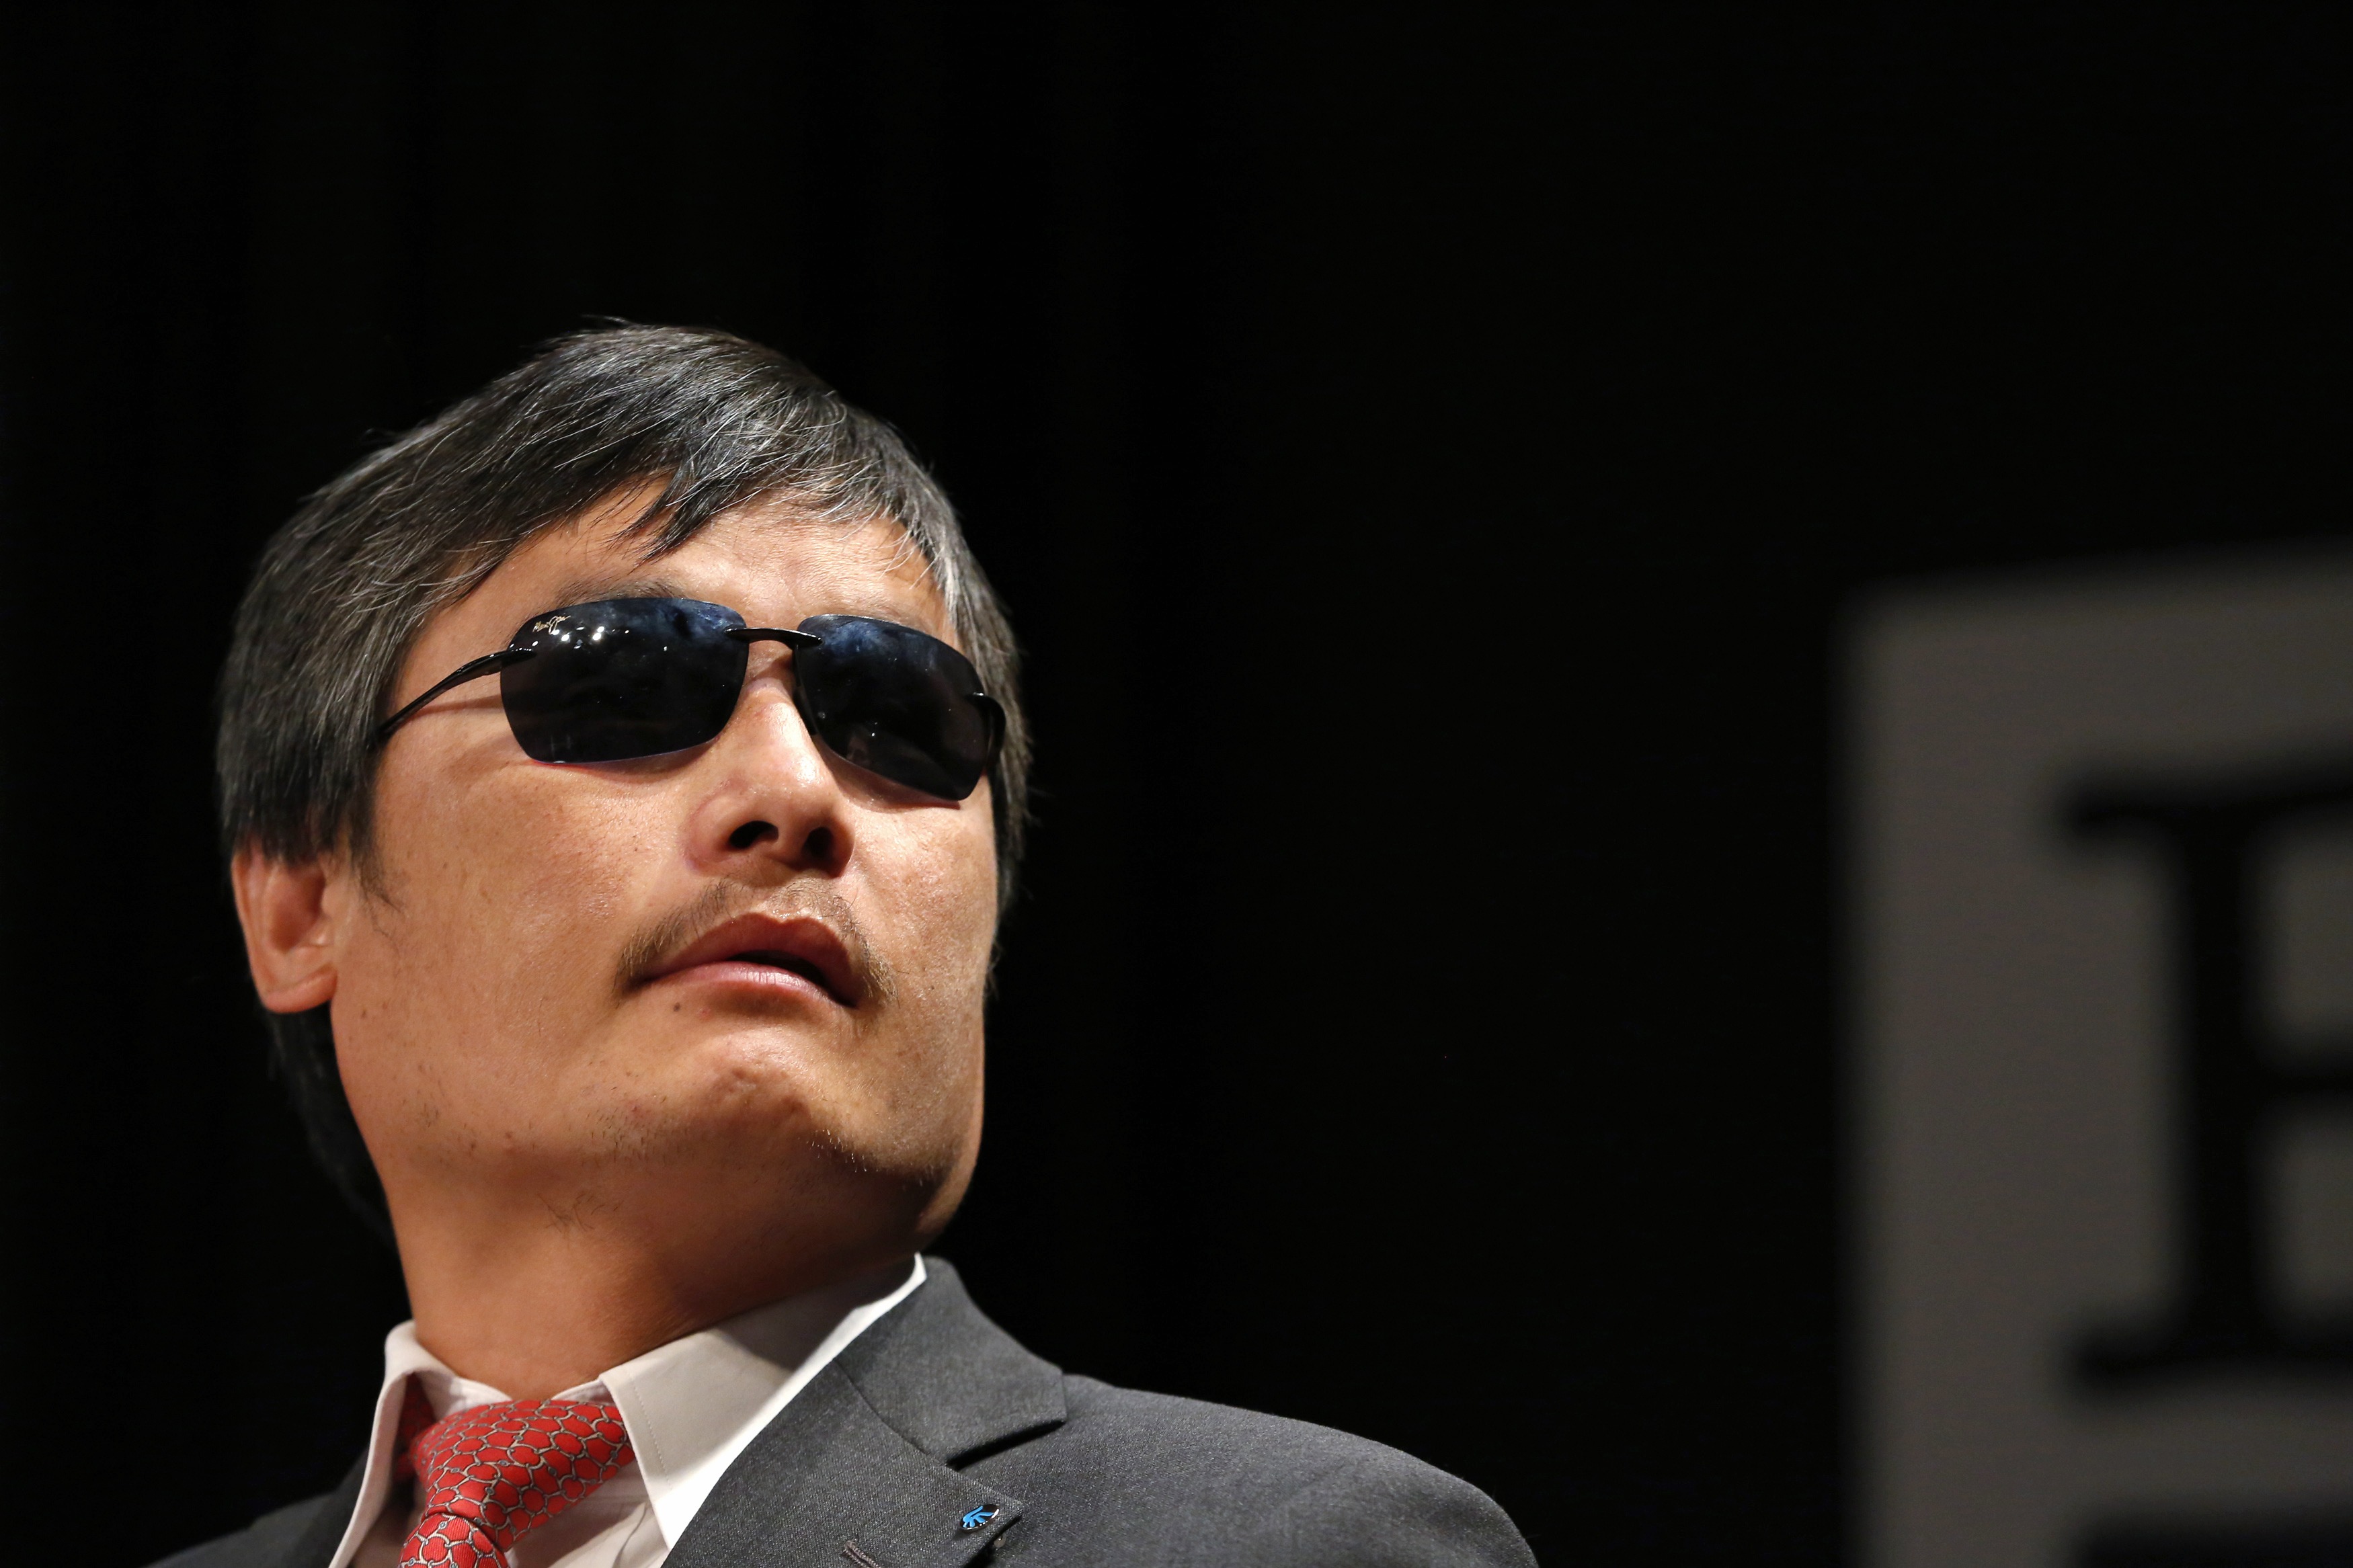 Chen Guangcheng was a member of a group of mostly self-taught individuals providing free or low-cost legal services in China. Photo: Reuters